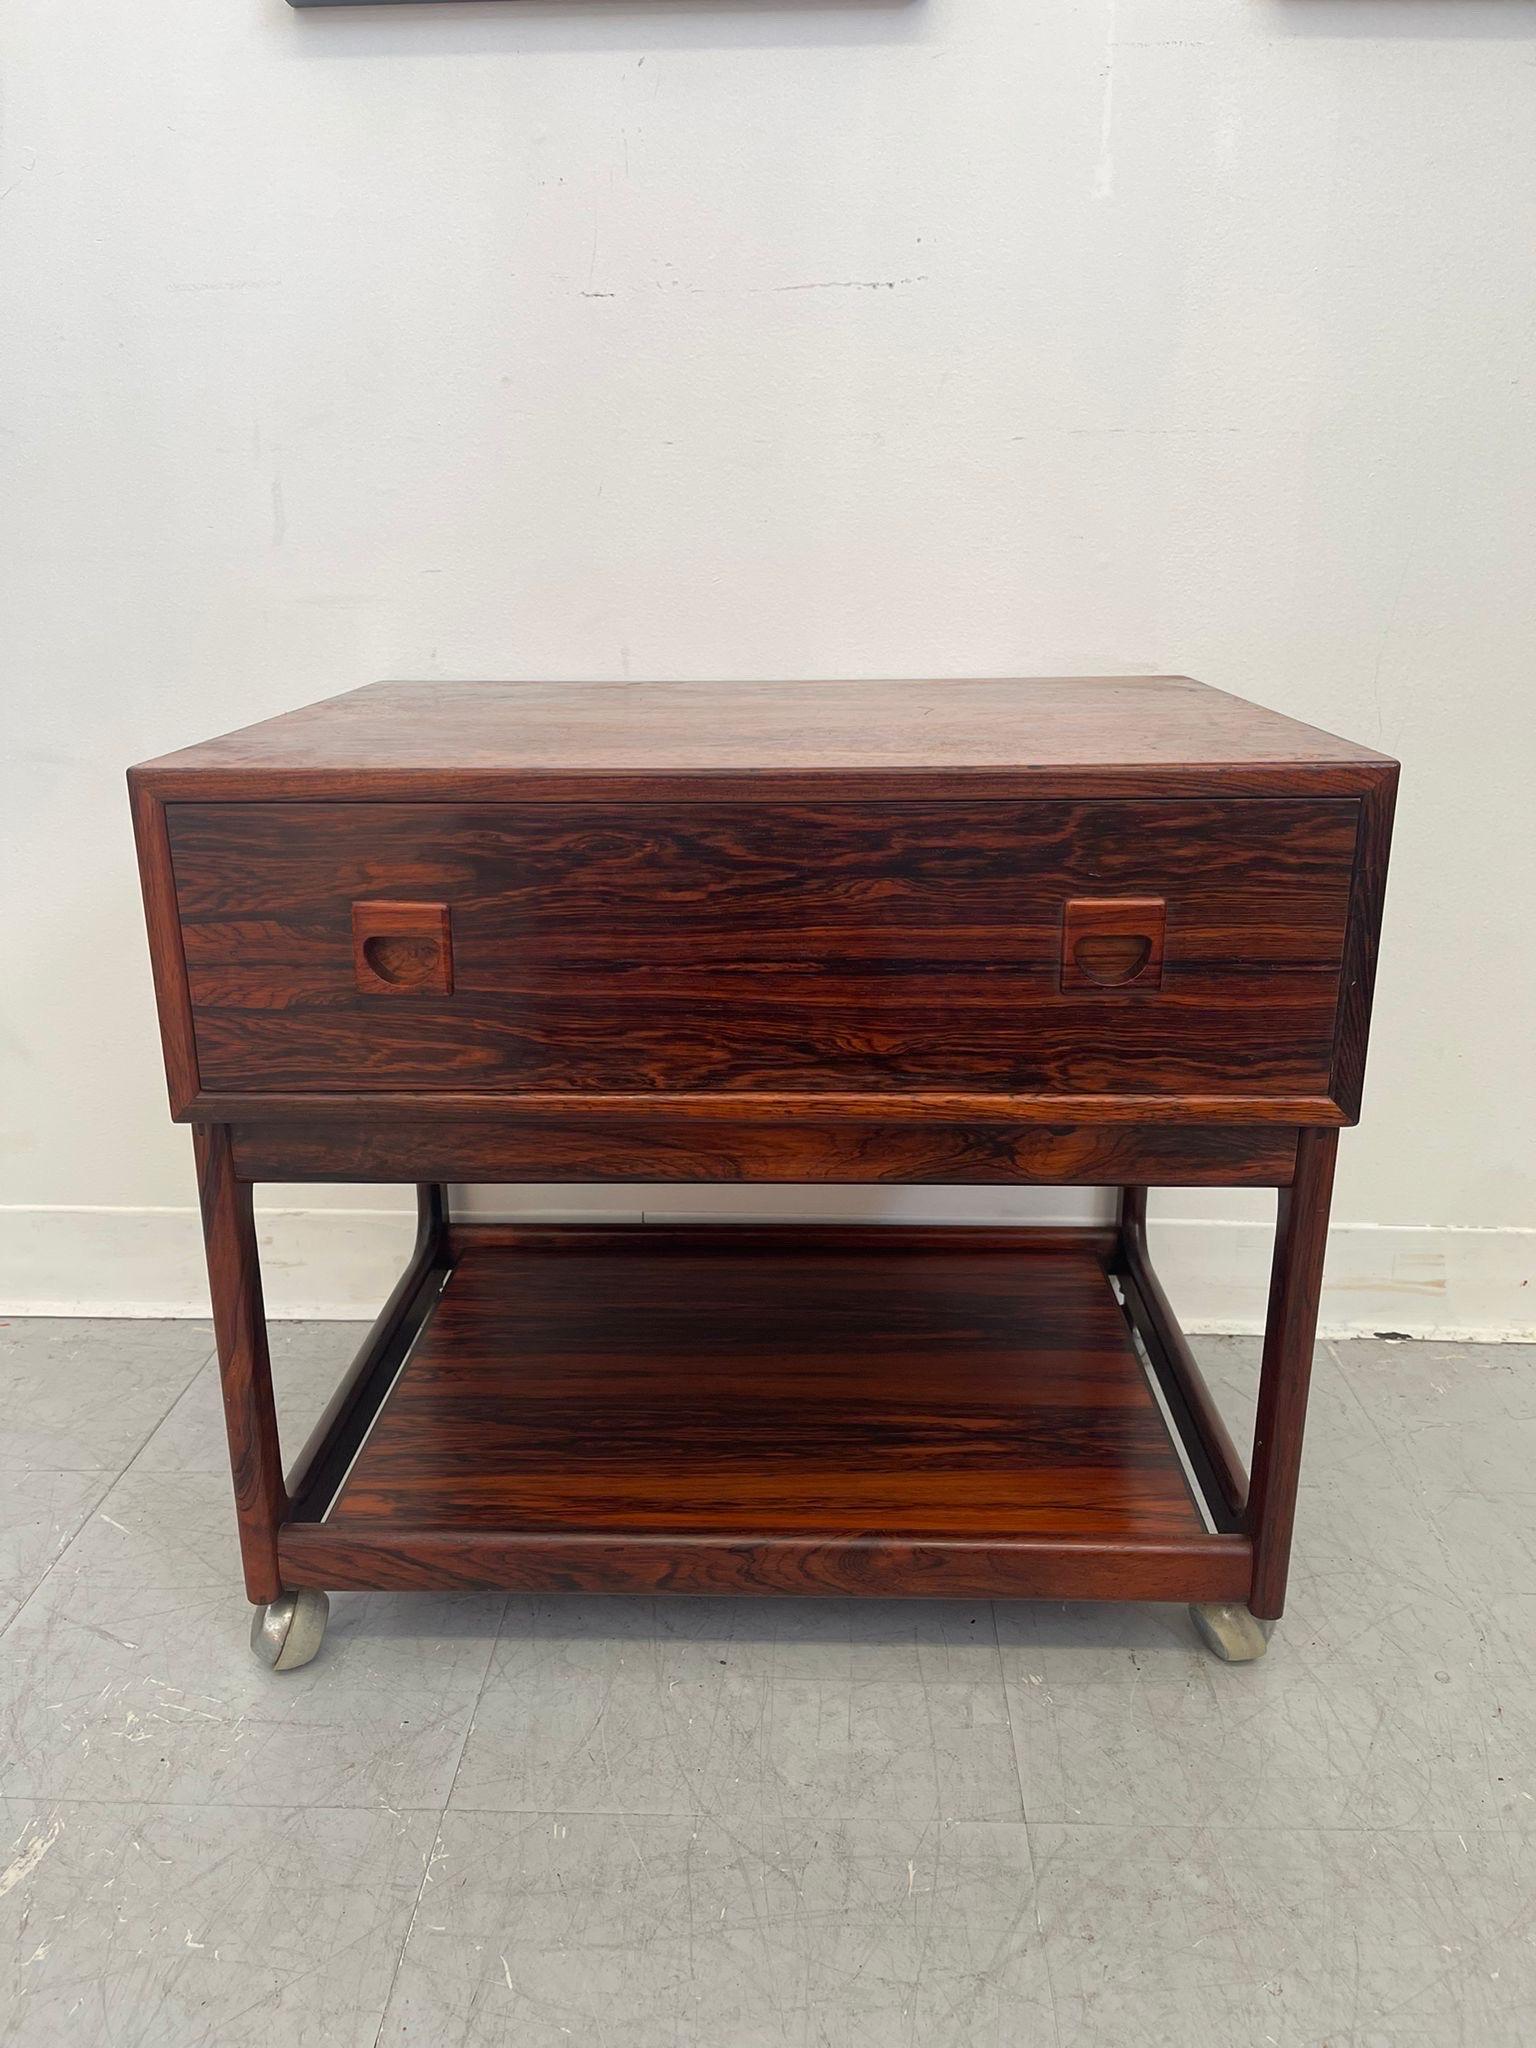 This is a classic Danish Modern design, especially in regards to the wood carved handles. Single dovetailed drawer with dividers above open shelf space.Beautiful rosewood grain. Finished Back. Vintage Condition Consistent with Age as